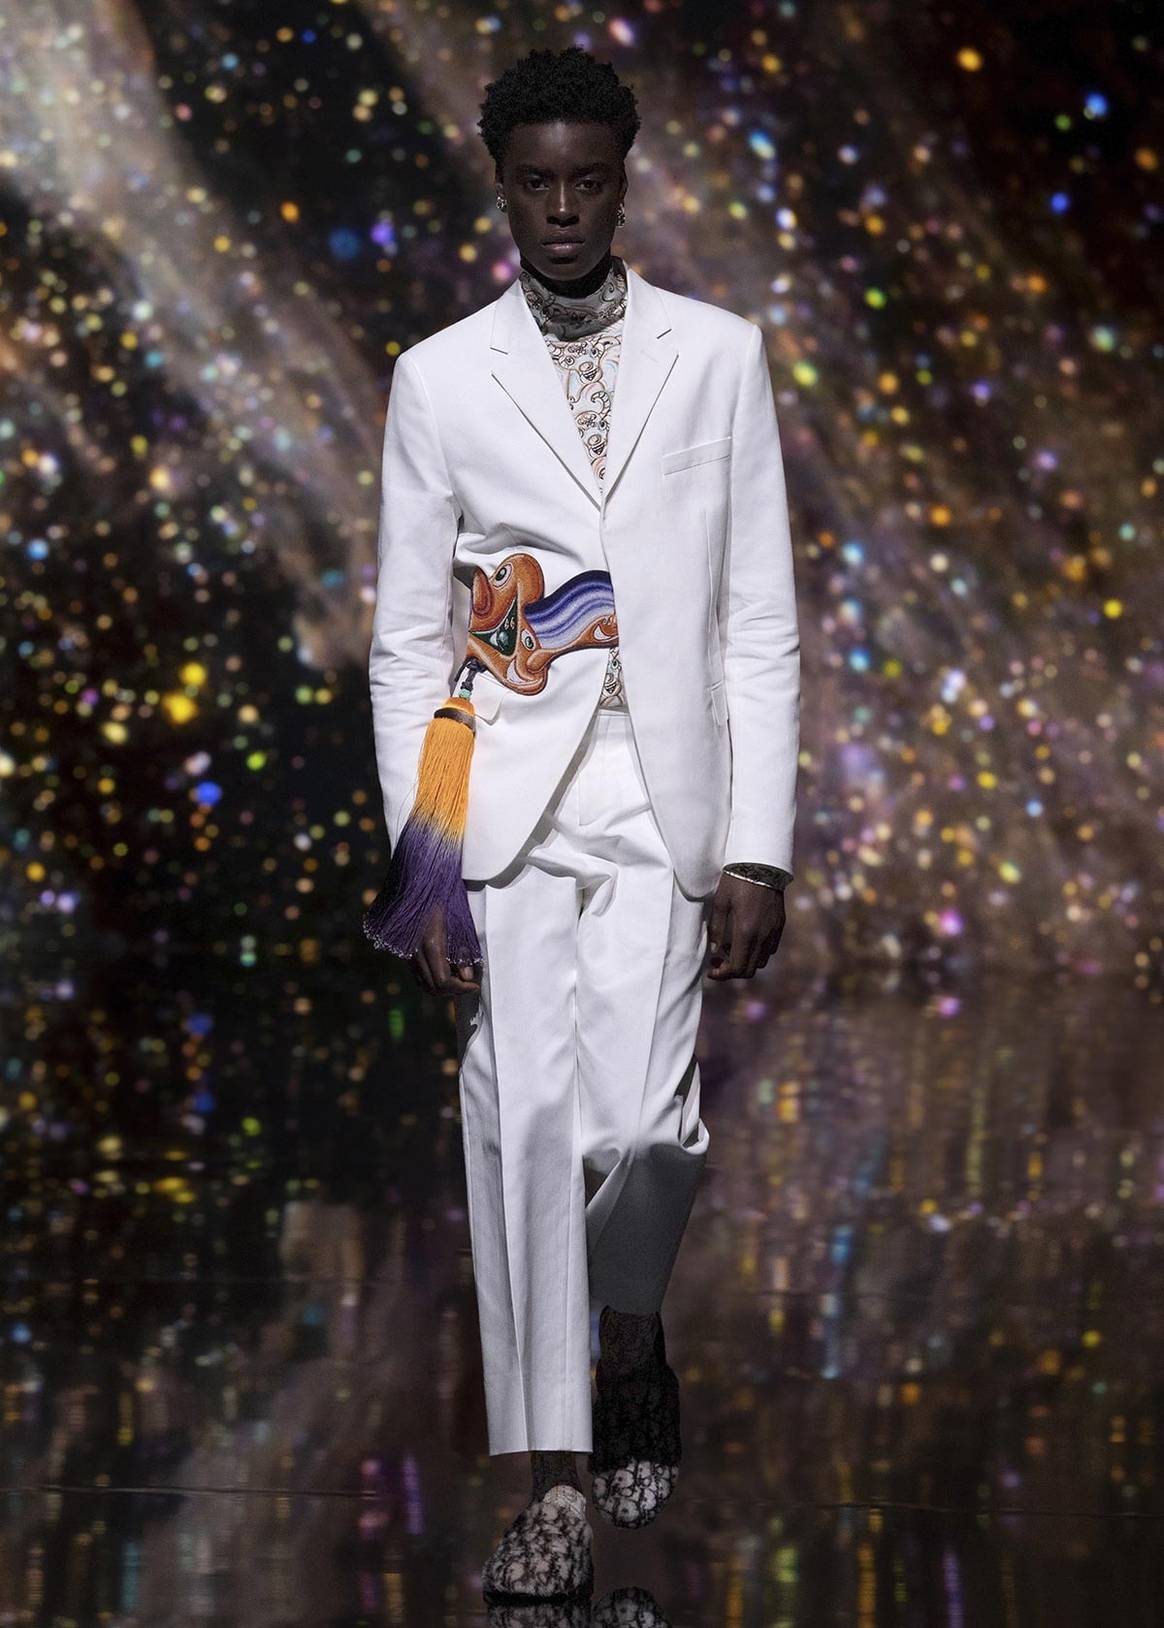 Dior unveils a joyful and psychedelic men's collection online